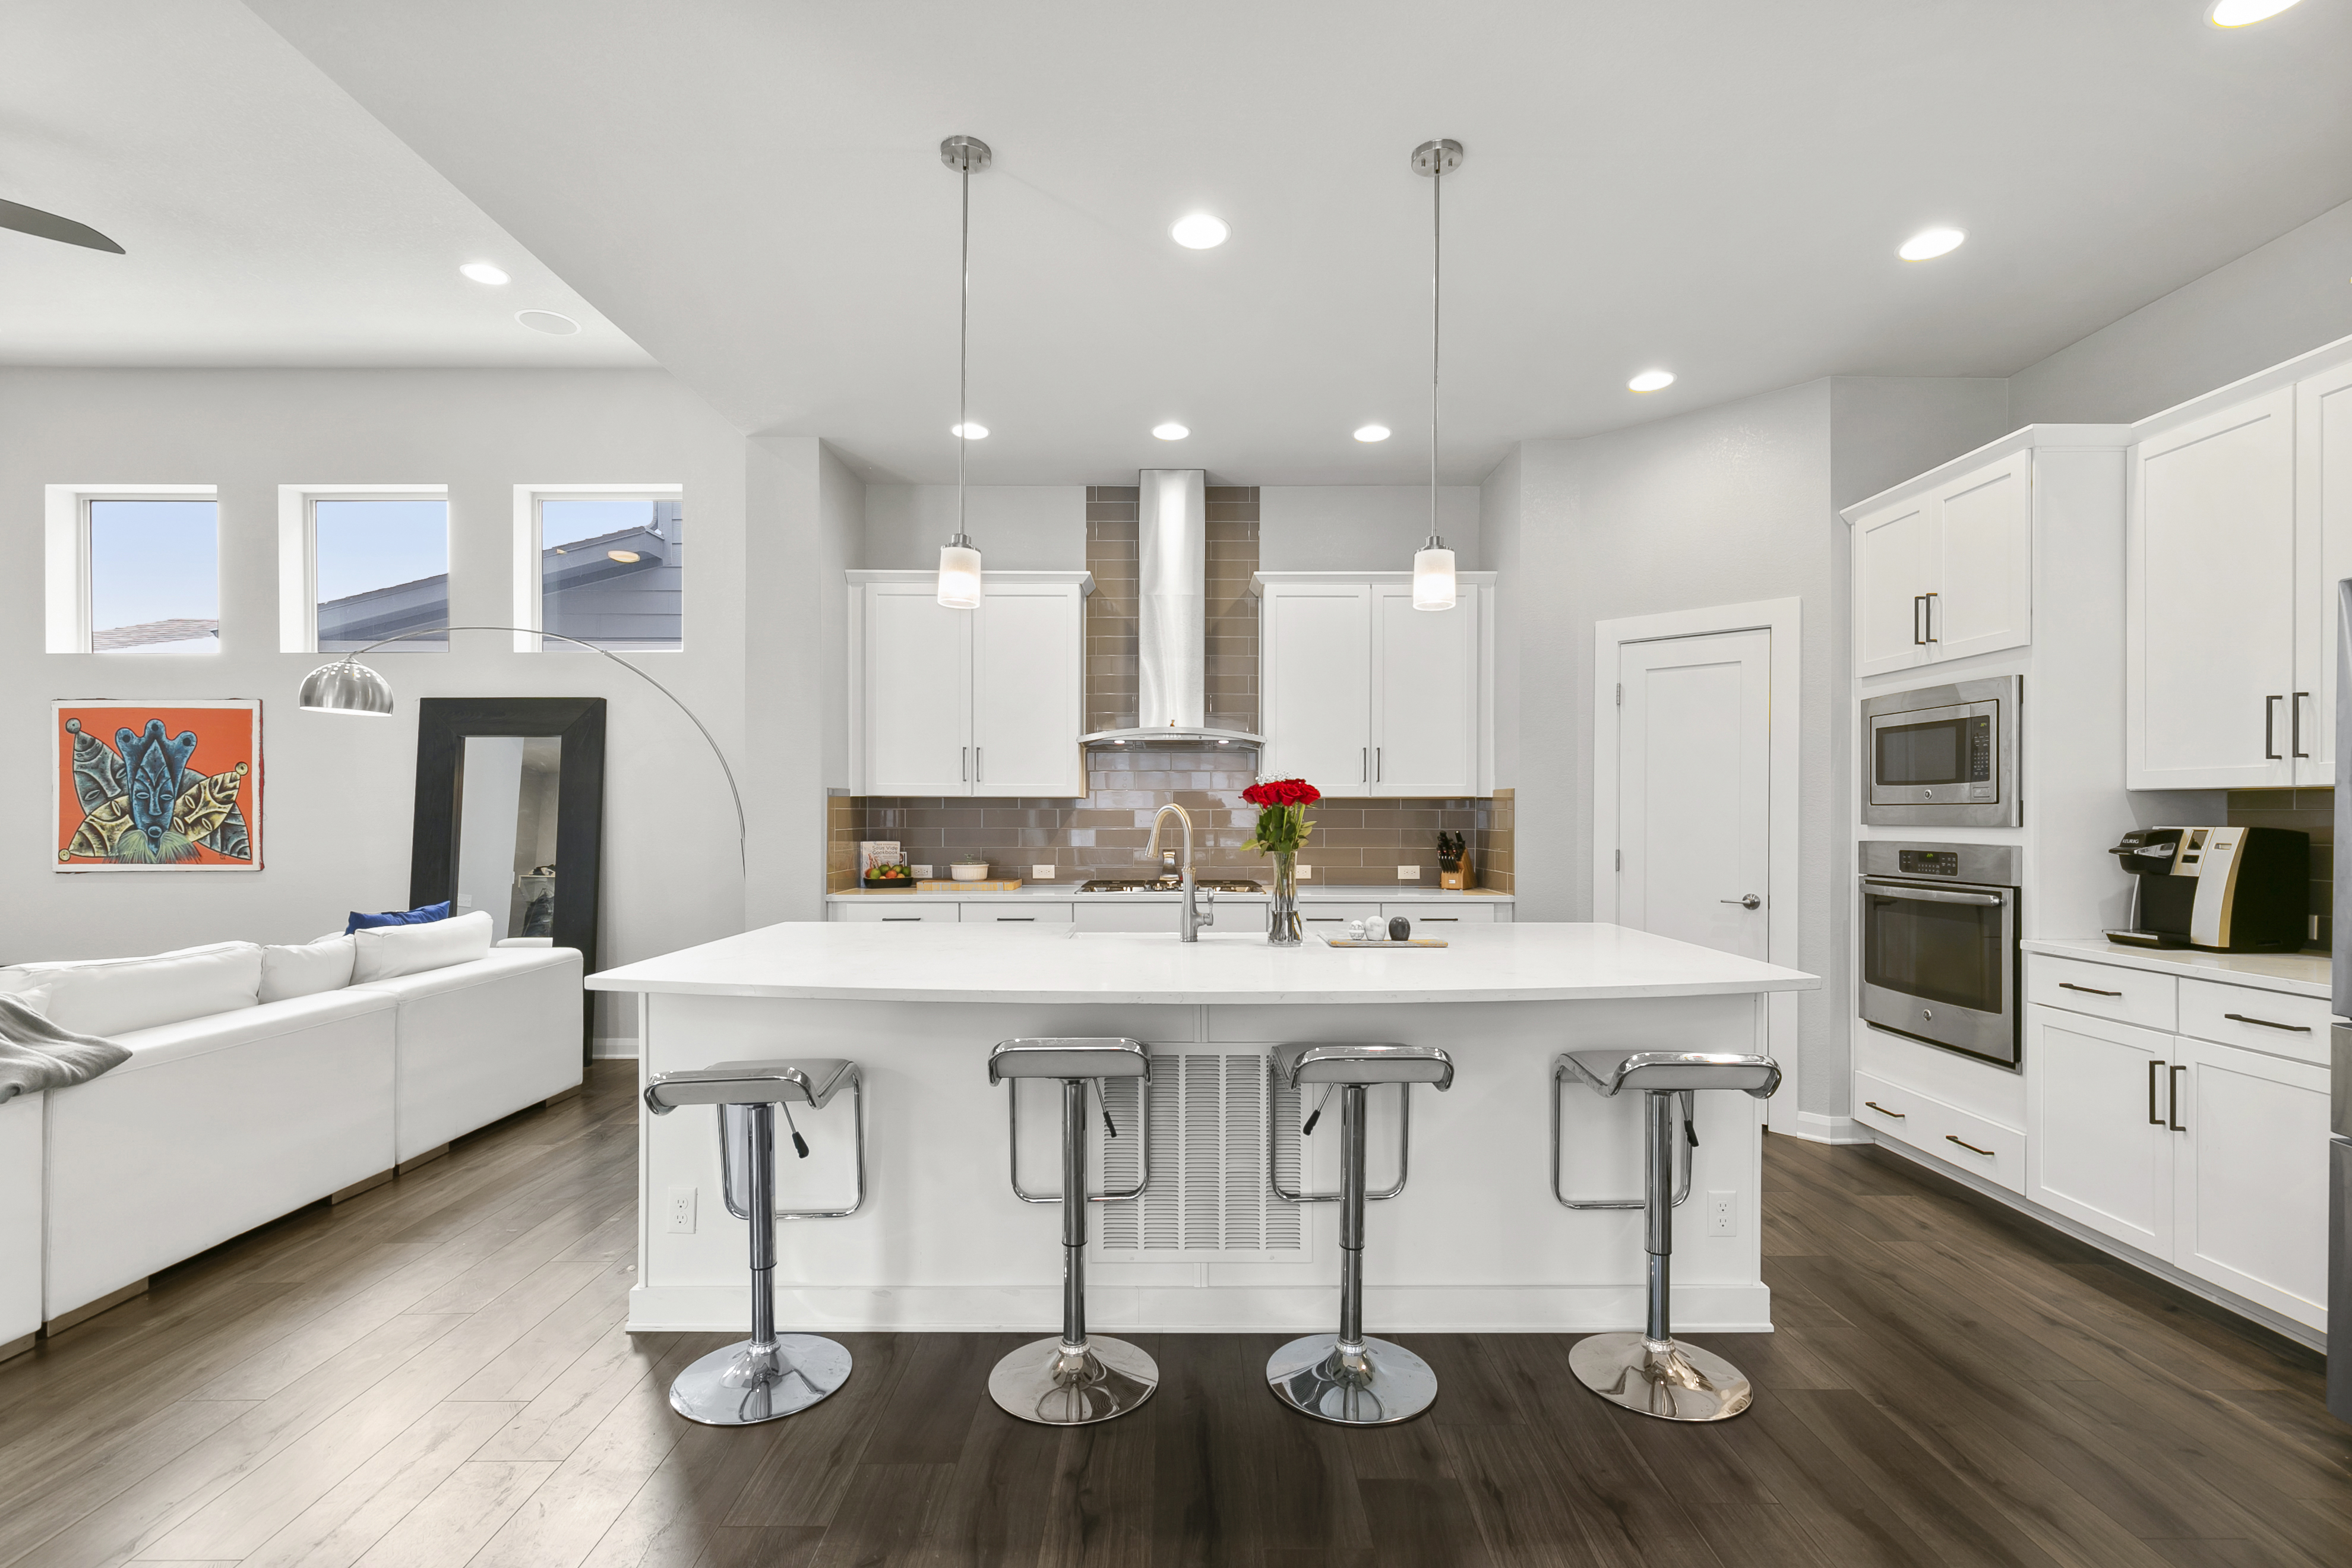 Denver Home Of The Day March 11 2019 Liz Daigle Real Estate